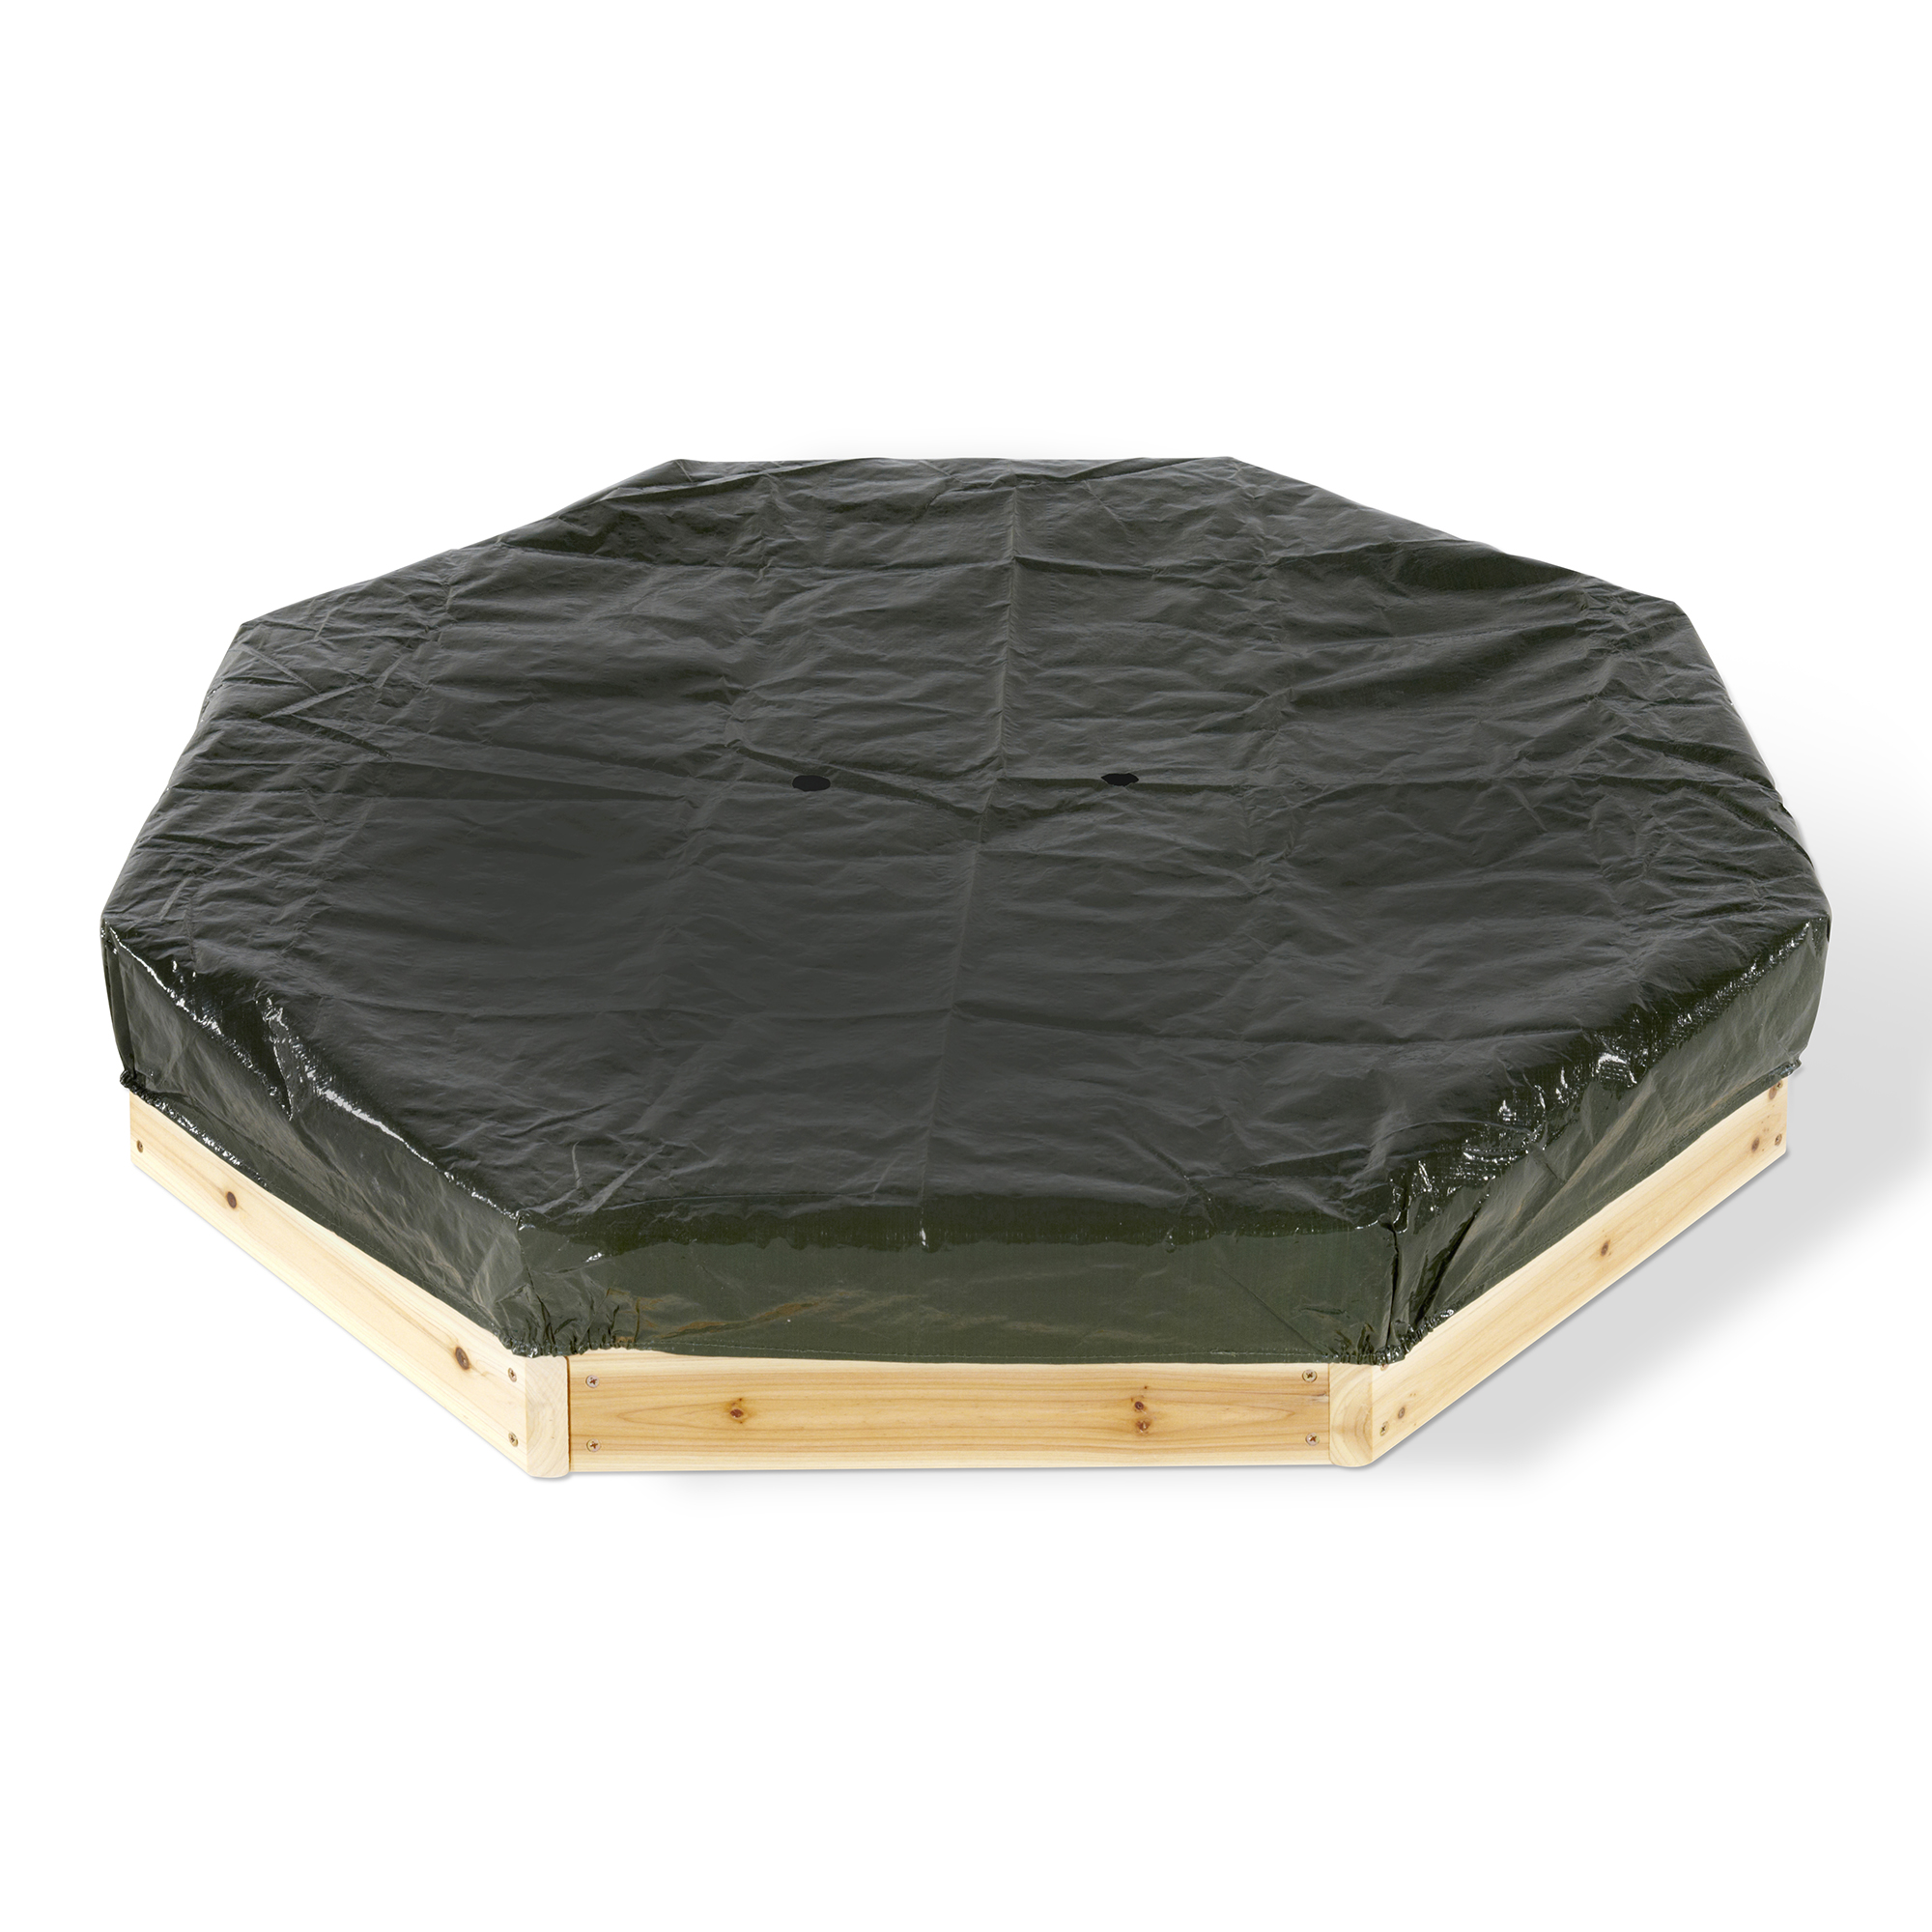 Plum Play Treasure Beach 46" Wooden Sandbox with protective cover and groundsheet - image 2 of 2